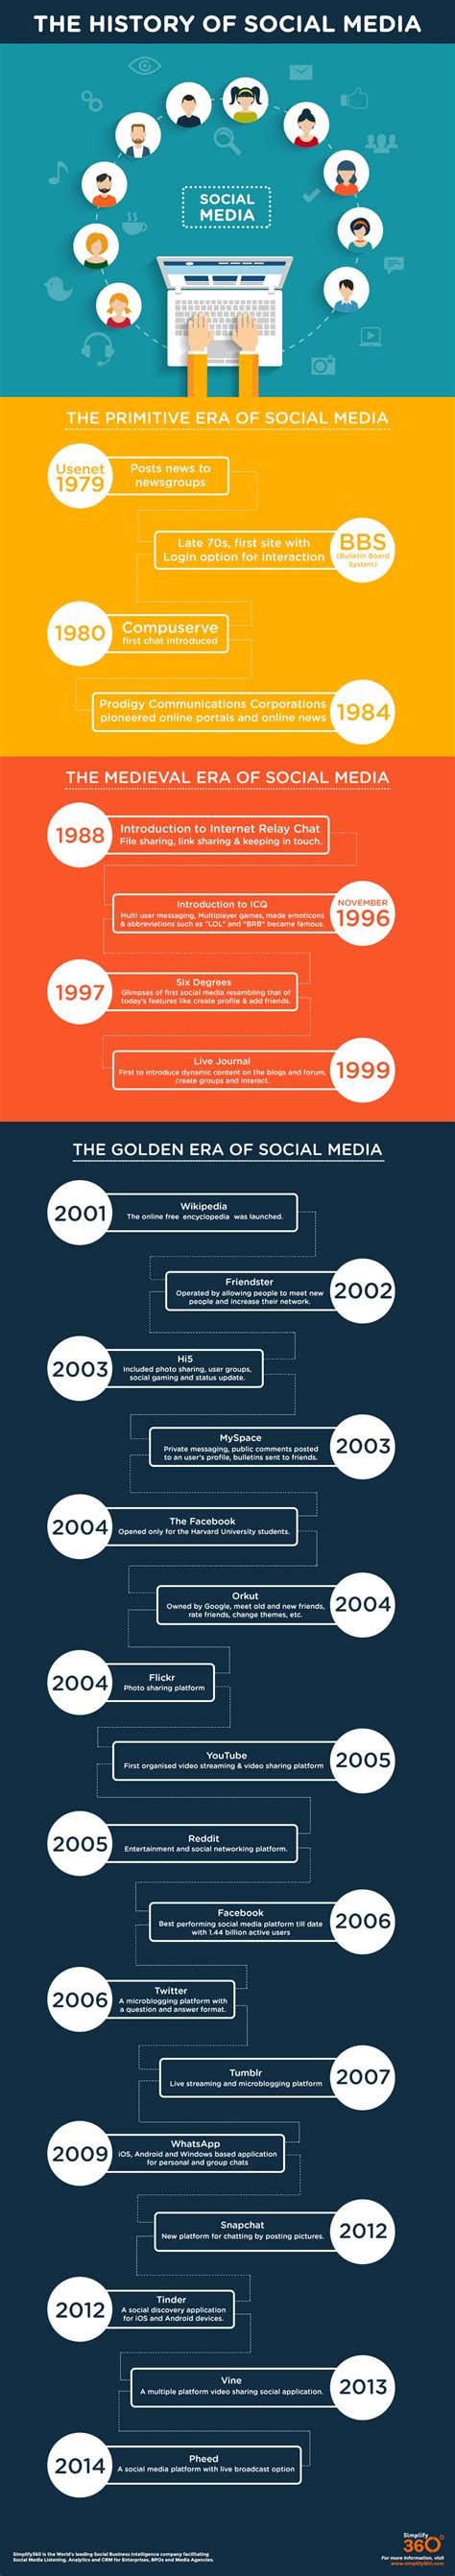 Before the social media boom, marketers thought social media marketing was just another fad that would soon likely pass, something in the vein of pyramid and networking scams. An Interesting Timeline of the Evolution of Social Media